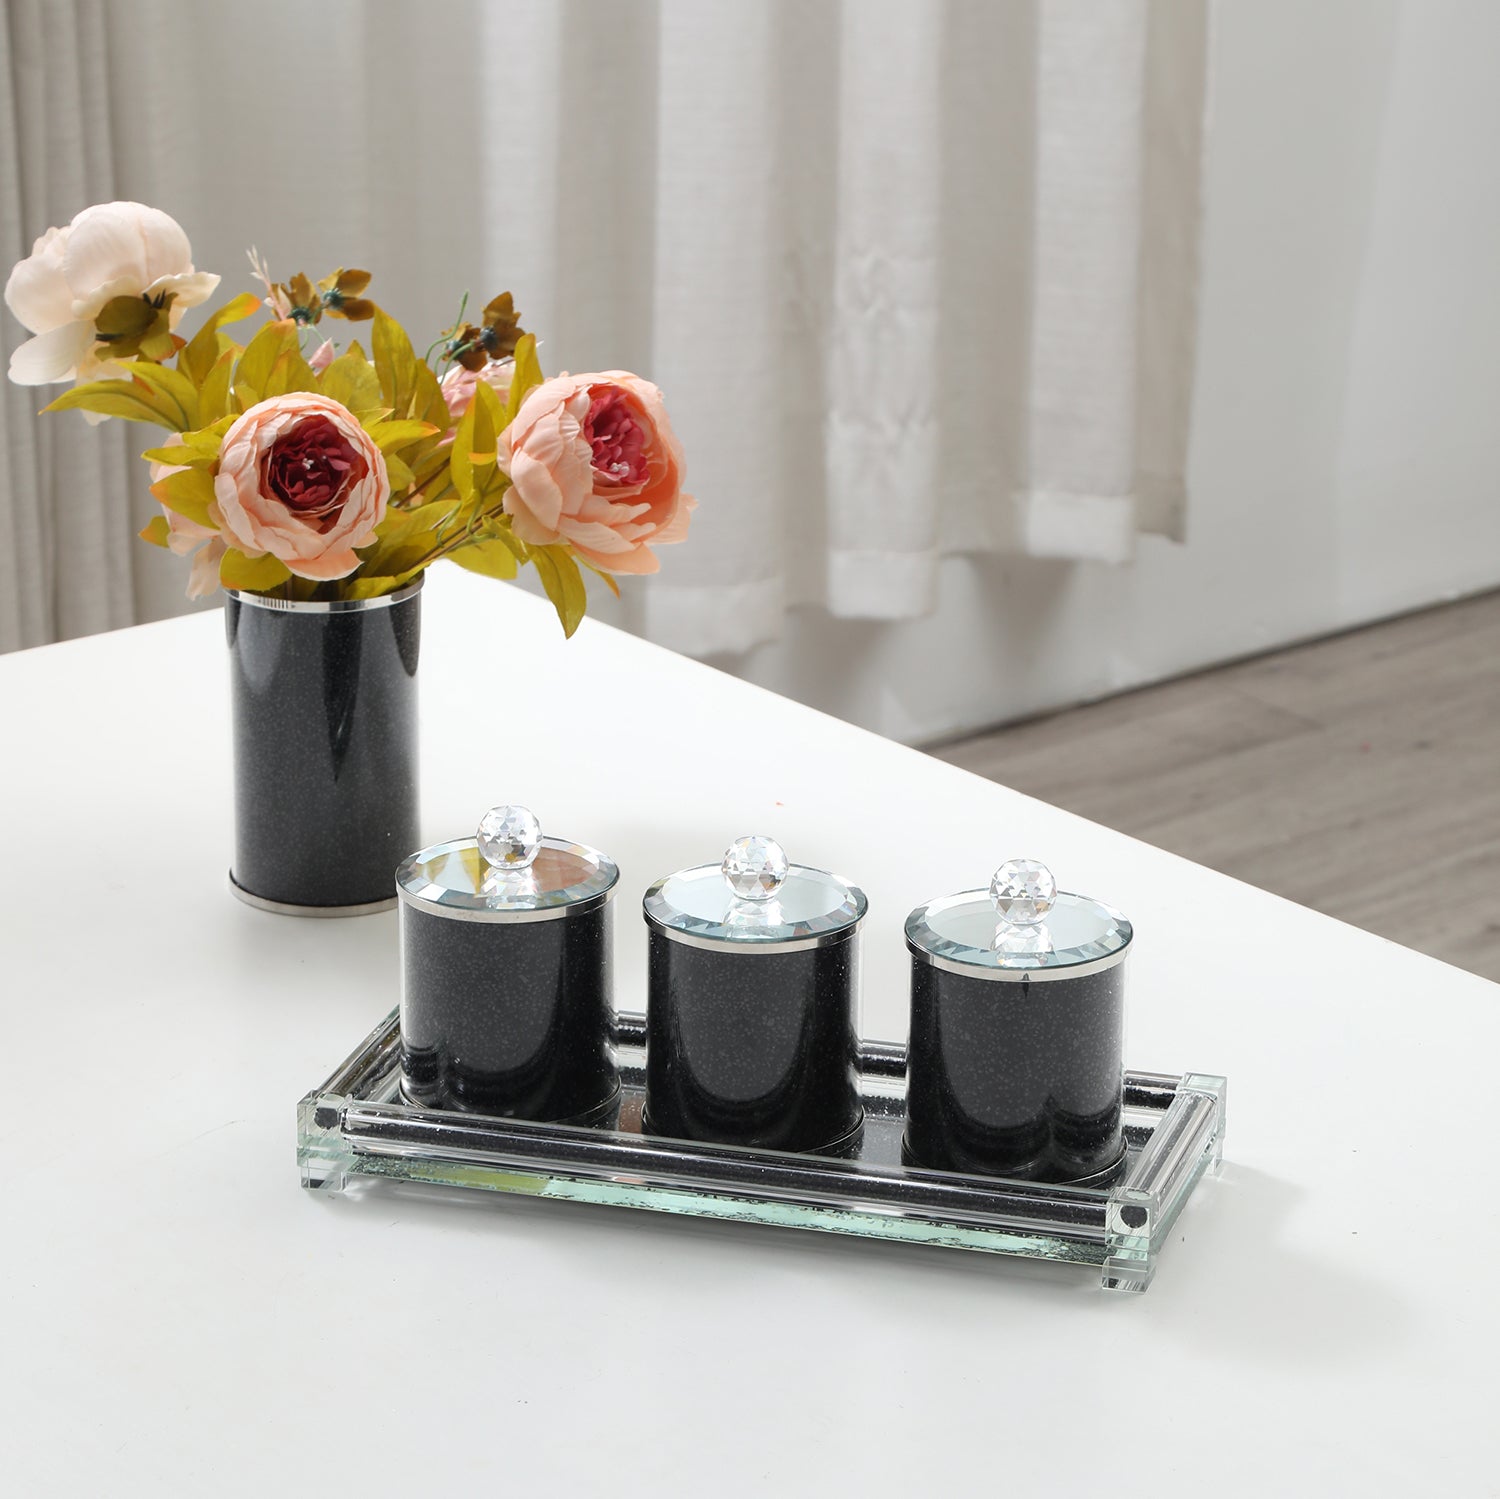 Ambrose Exquisite Tea, Sugar, Coffee Canisters with black-glass